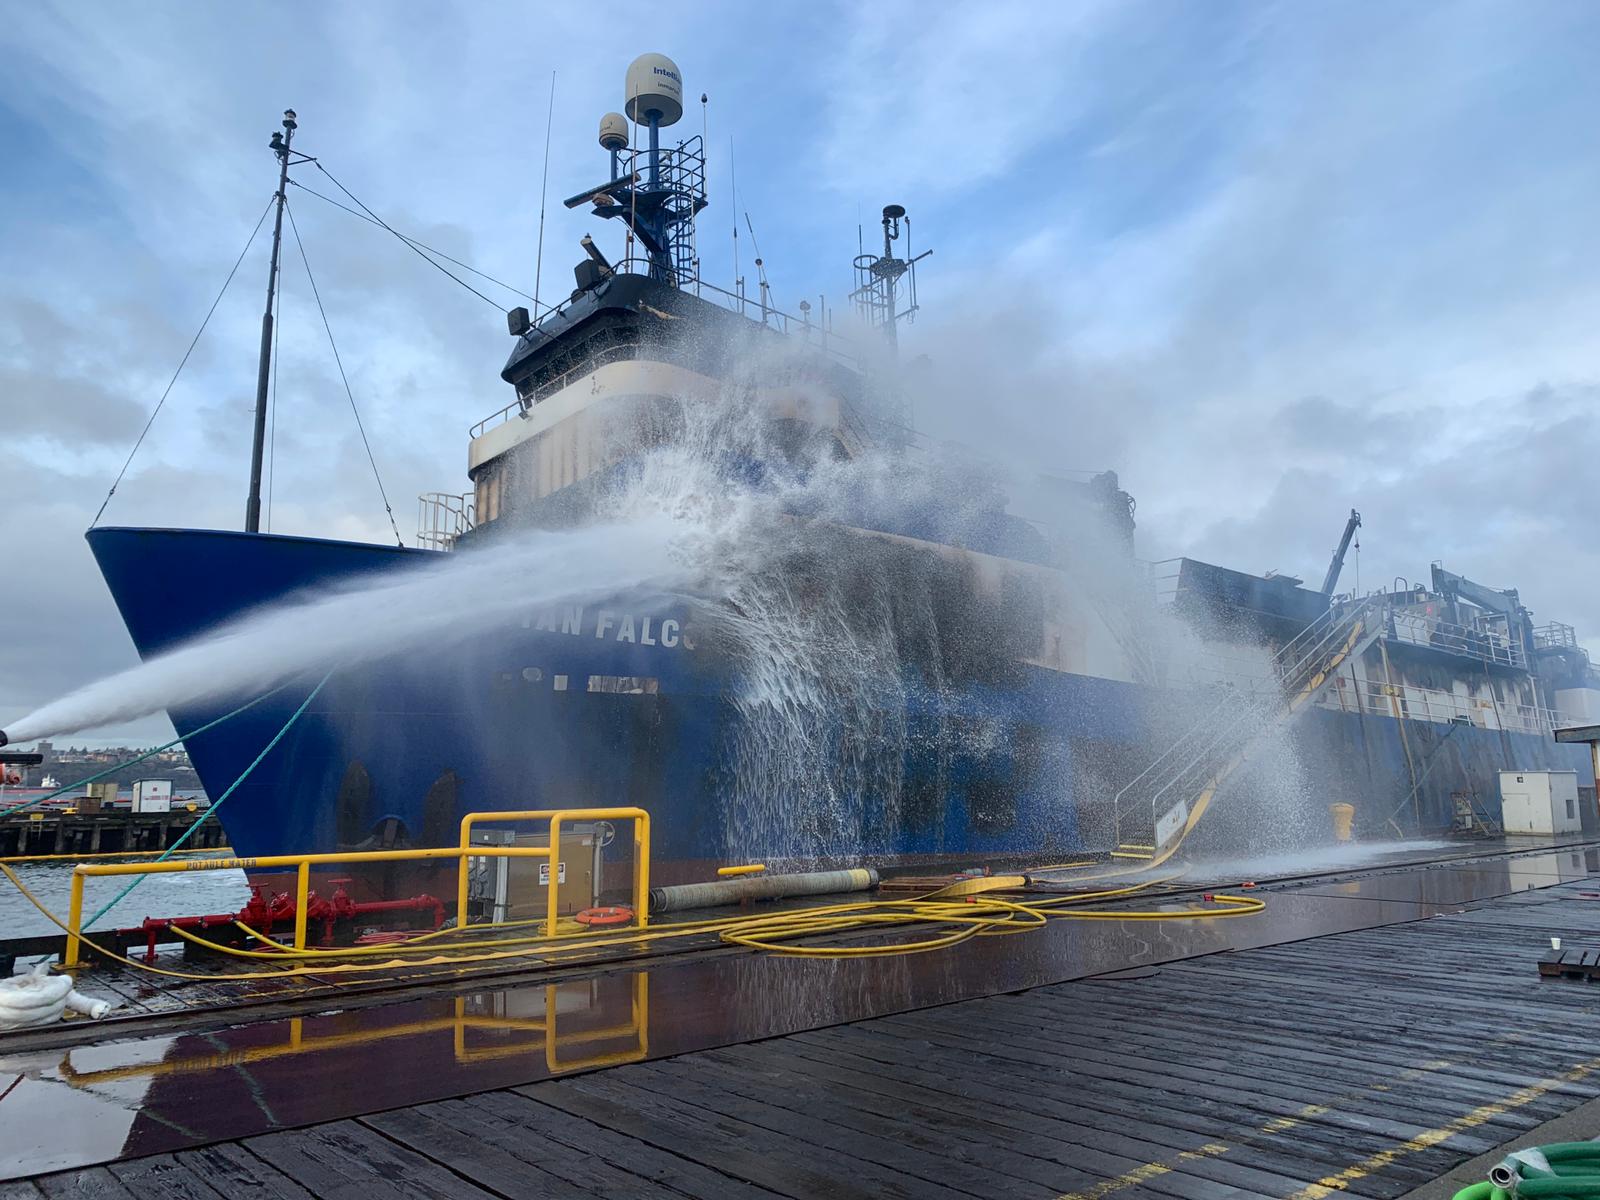 Resolve Marine fire rescue puts out flames on the Aleutian Falcon vessel.